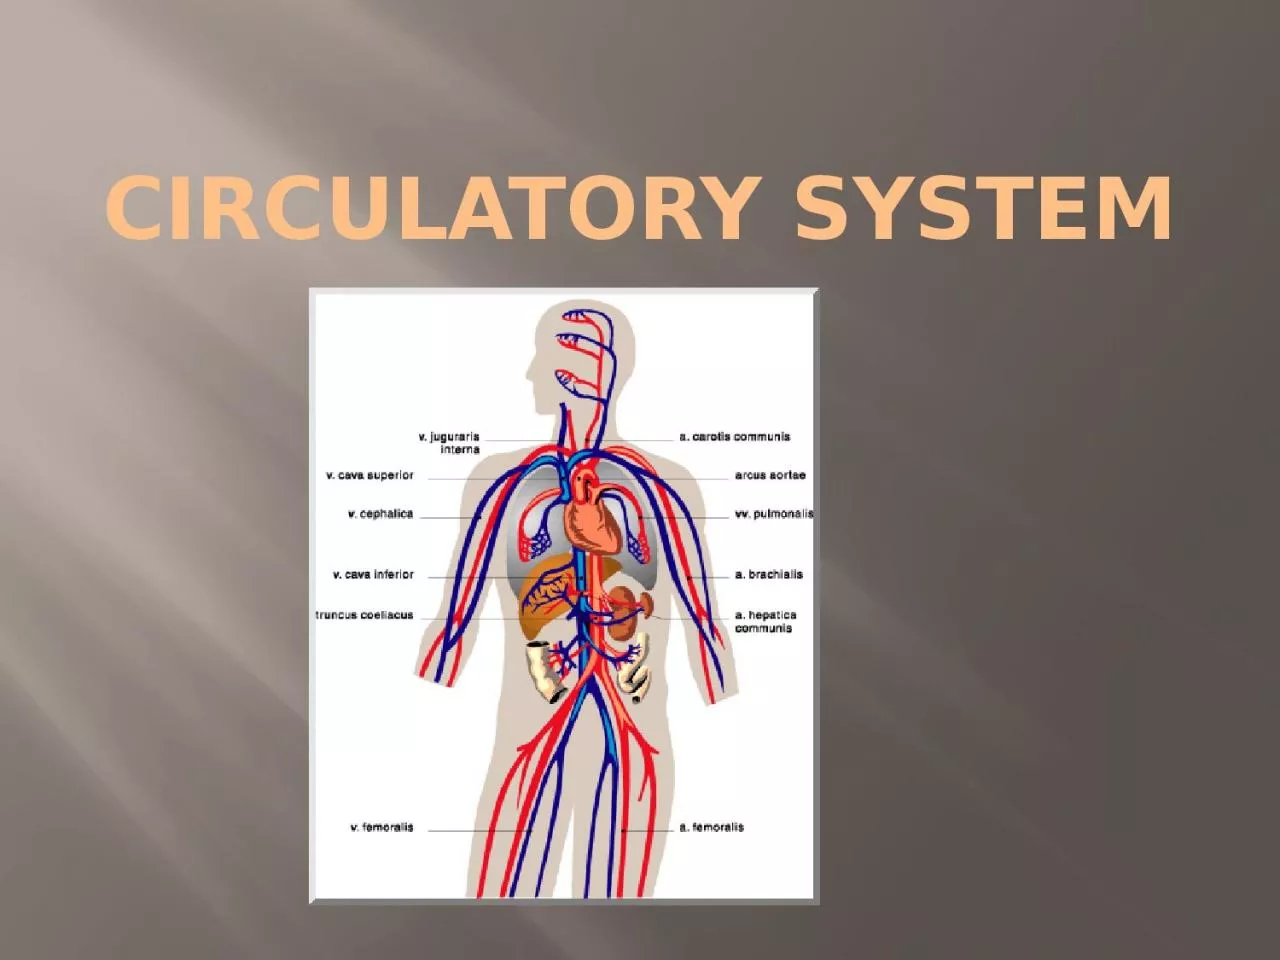 Circulatory System Functions